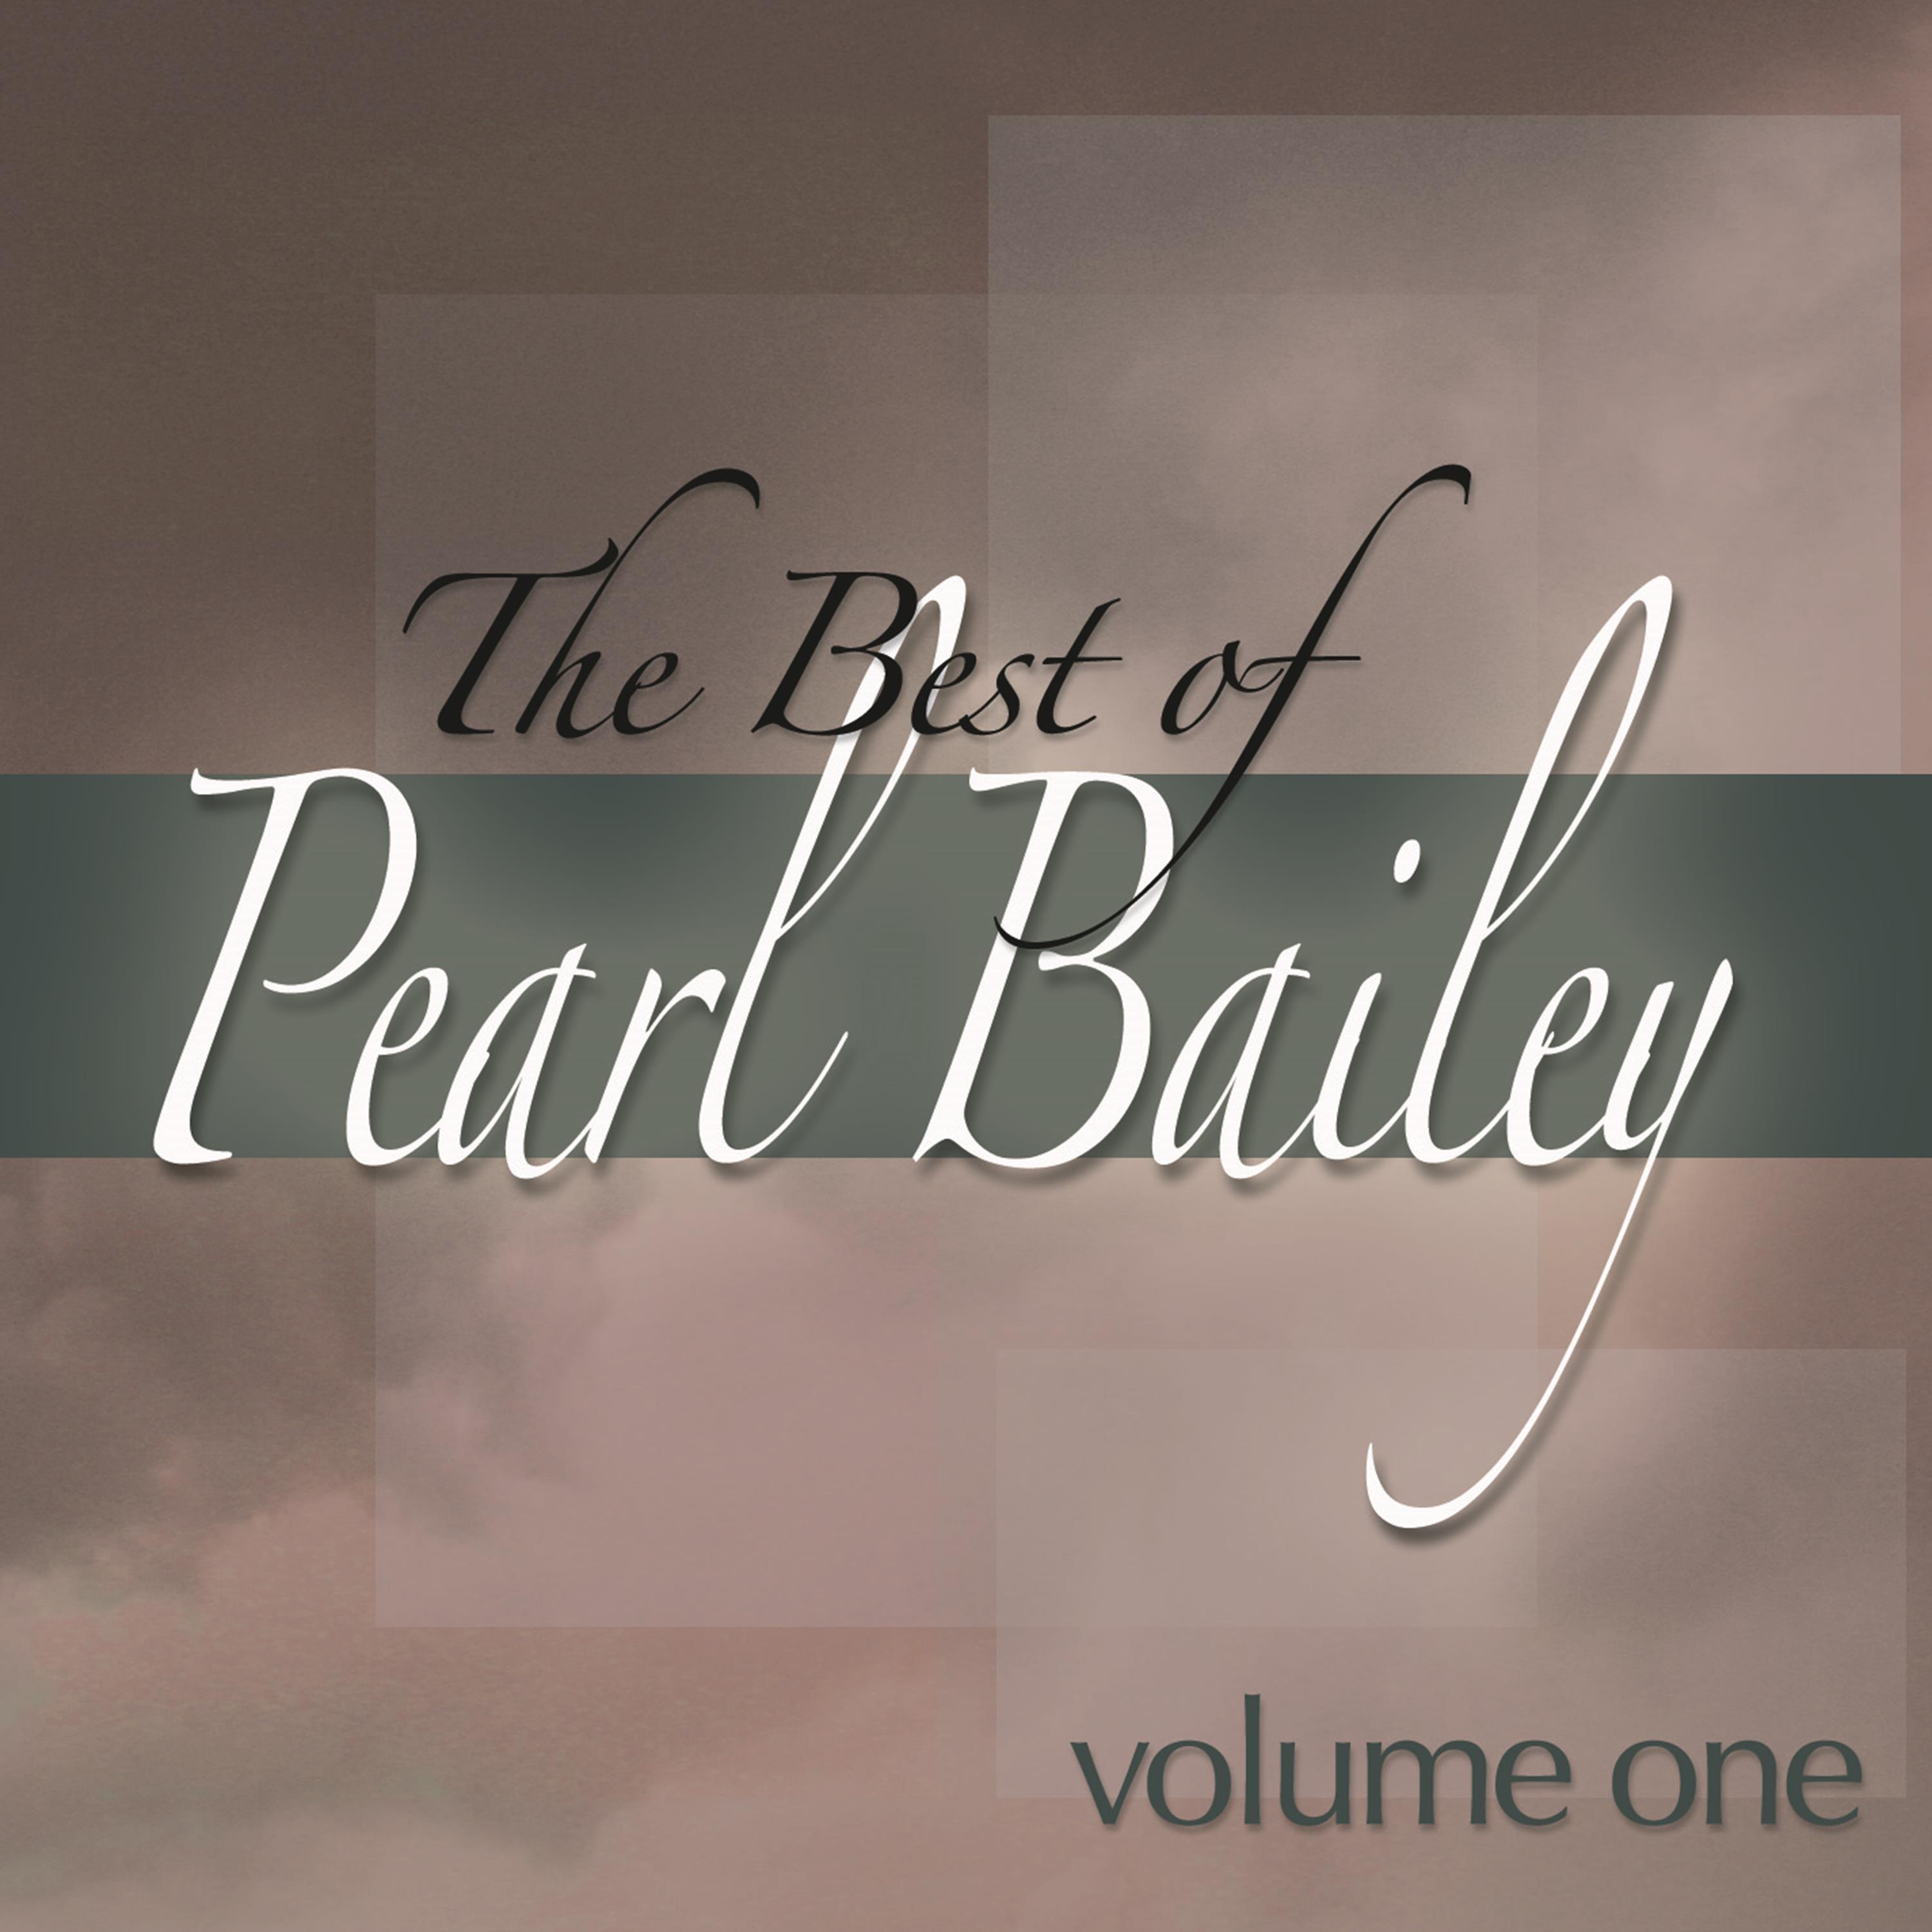 The Best of Pearl Bailey, Vol. 1